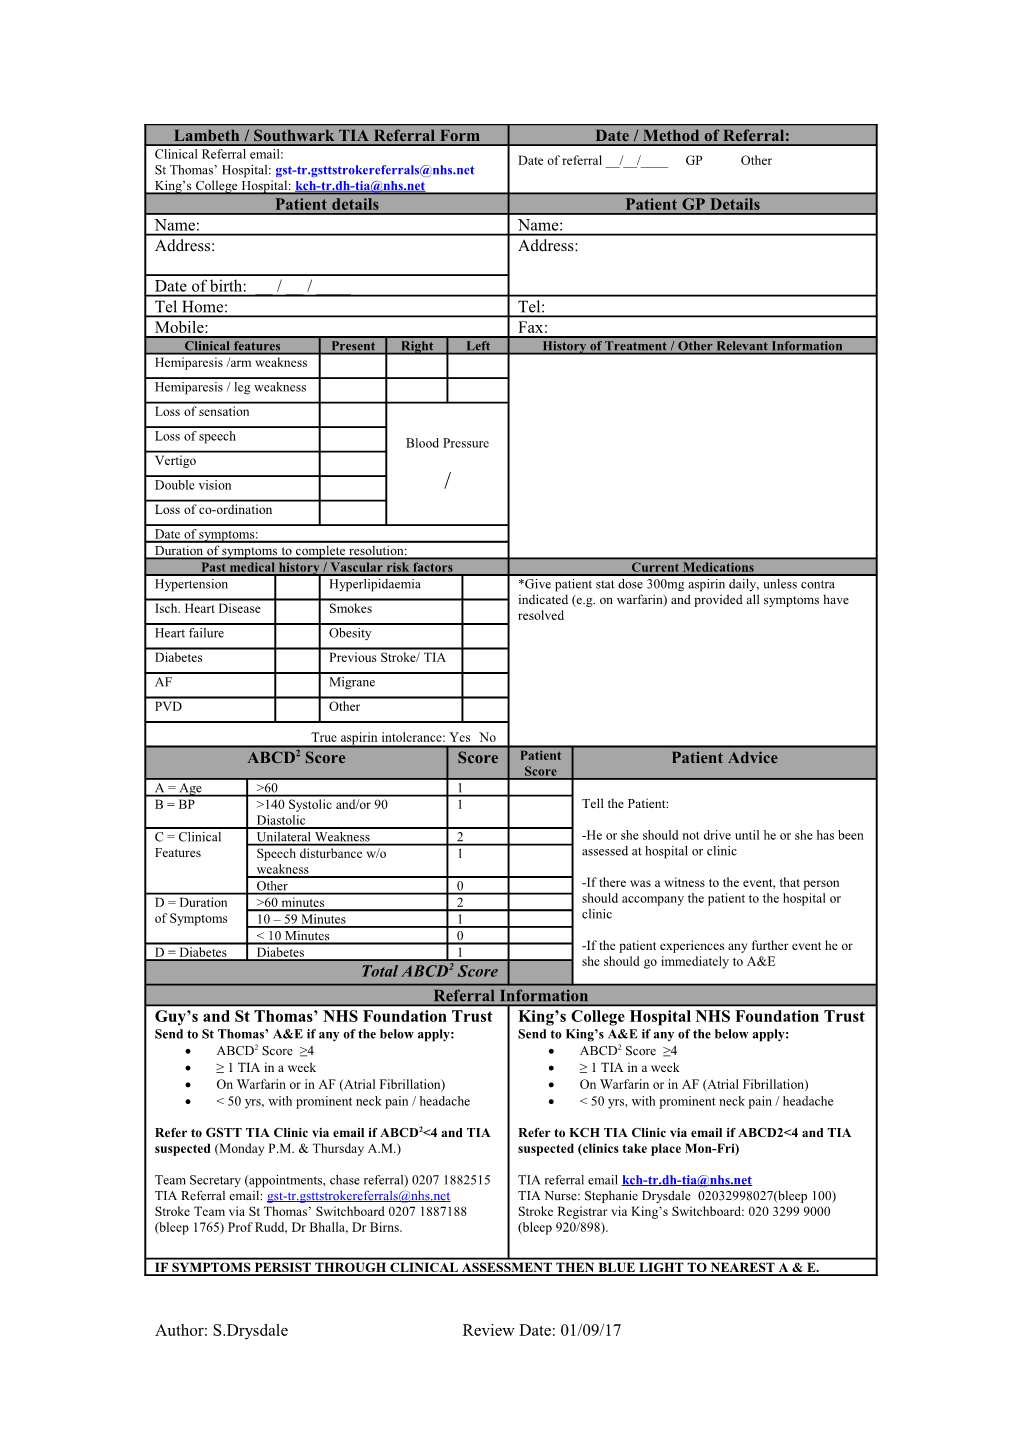 Guy's and St Thomas' Stroke Service Referral Form